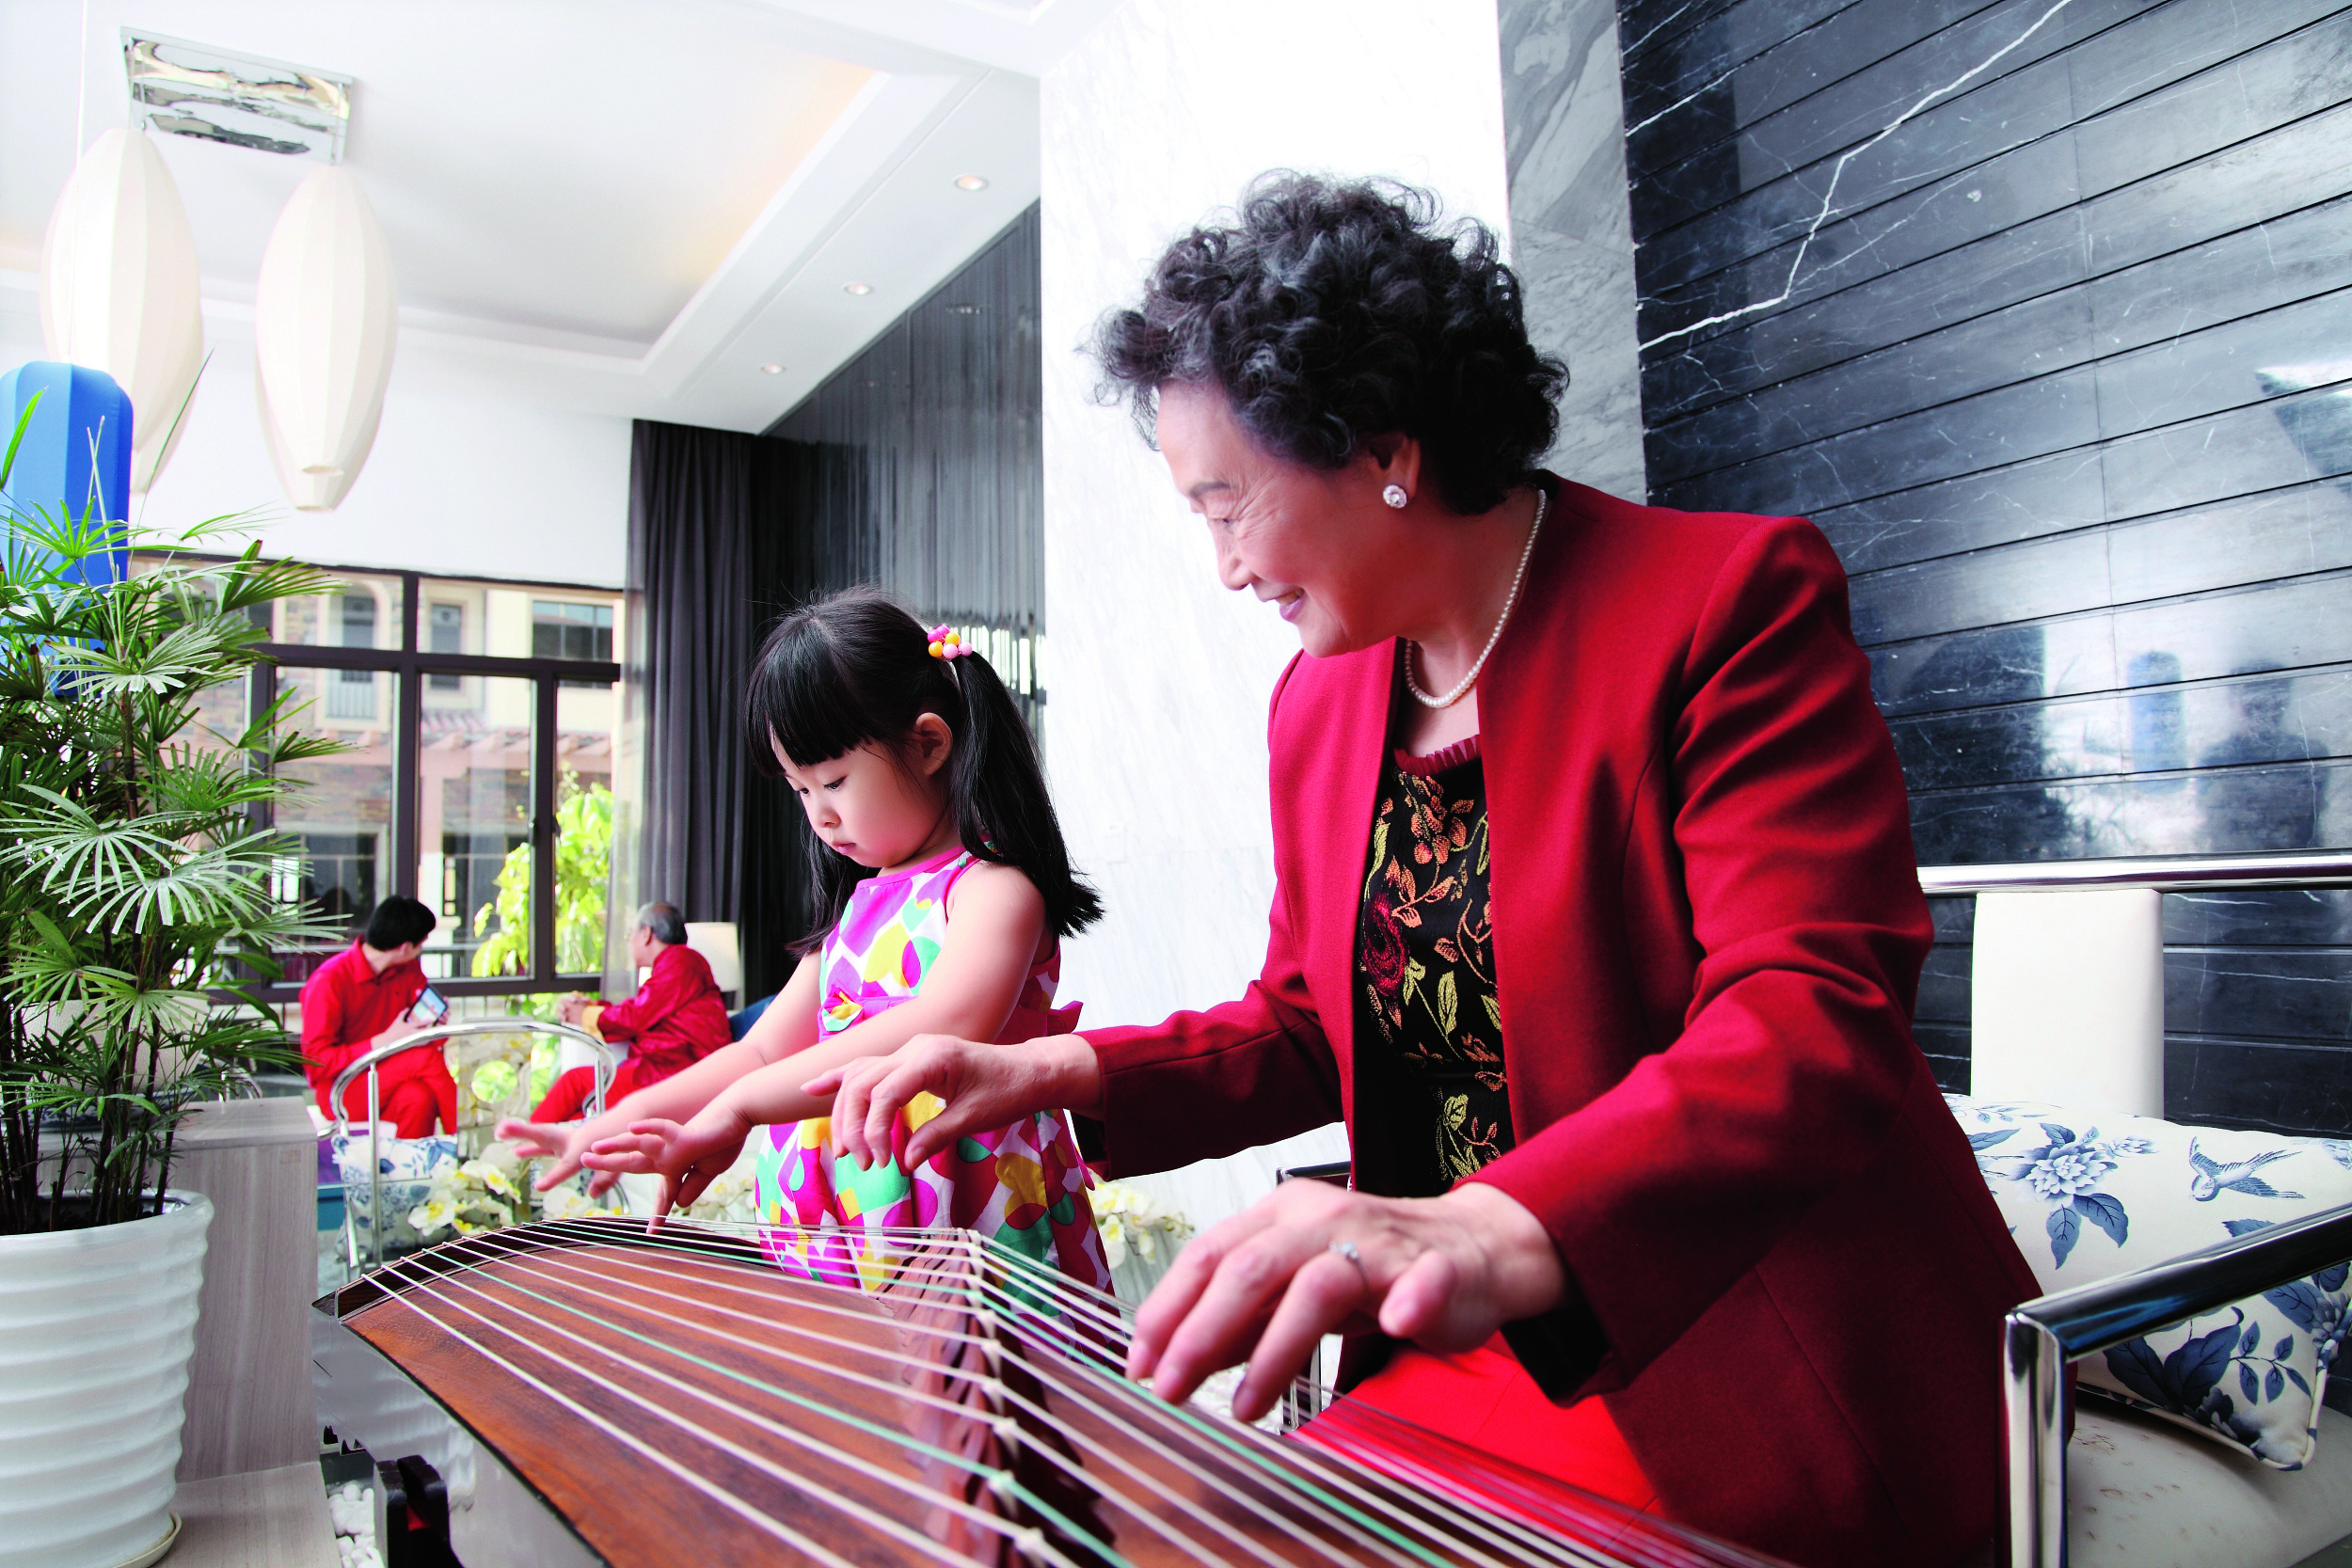 Guzheng: Chinese Stringed Instrument with Long-Lasting Popularity